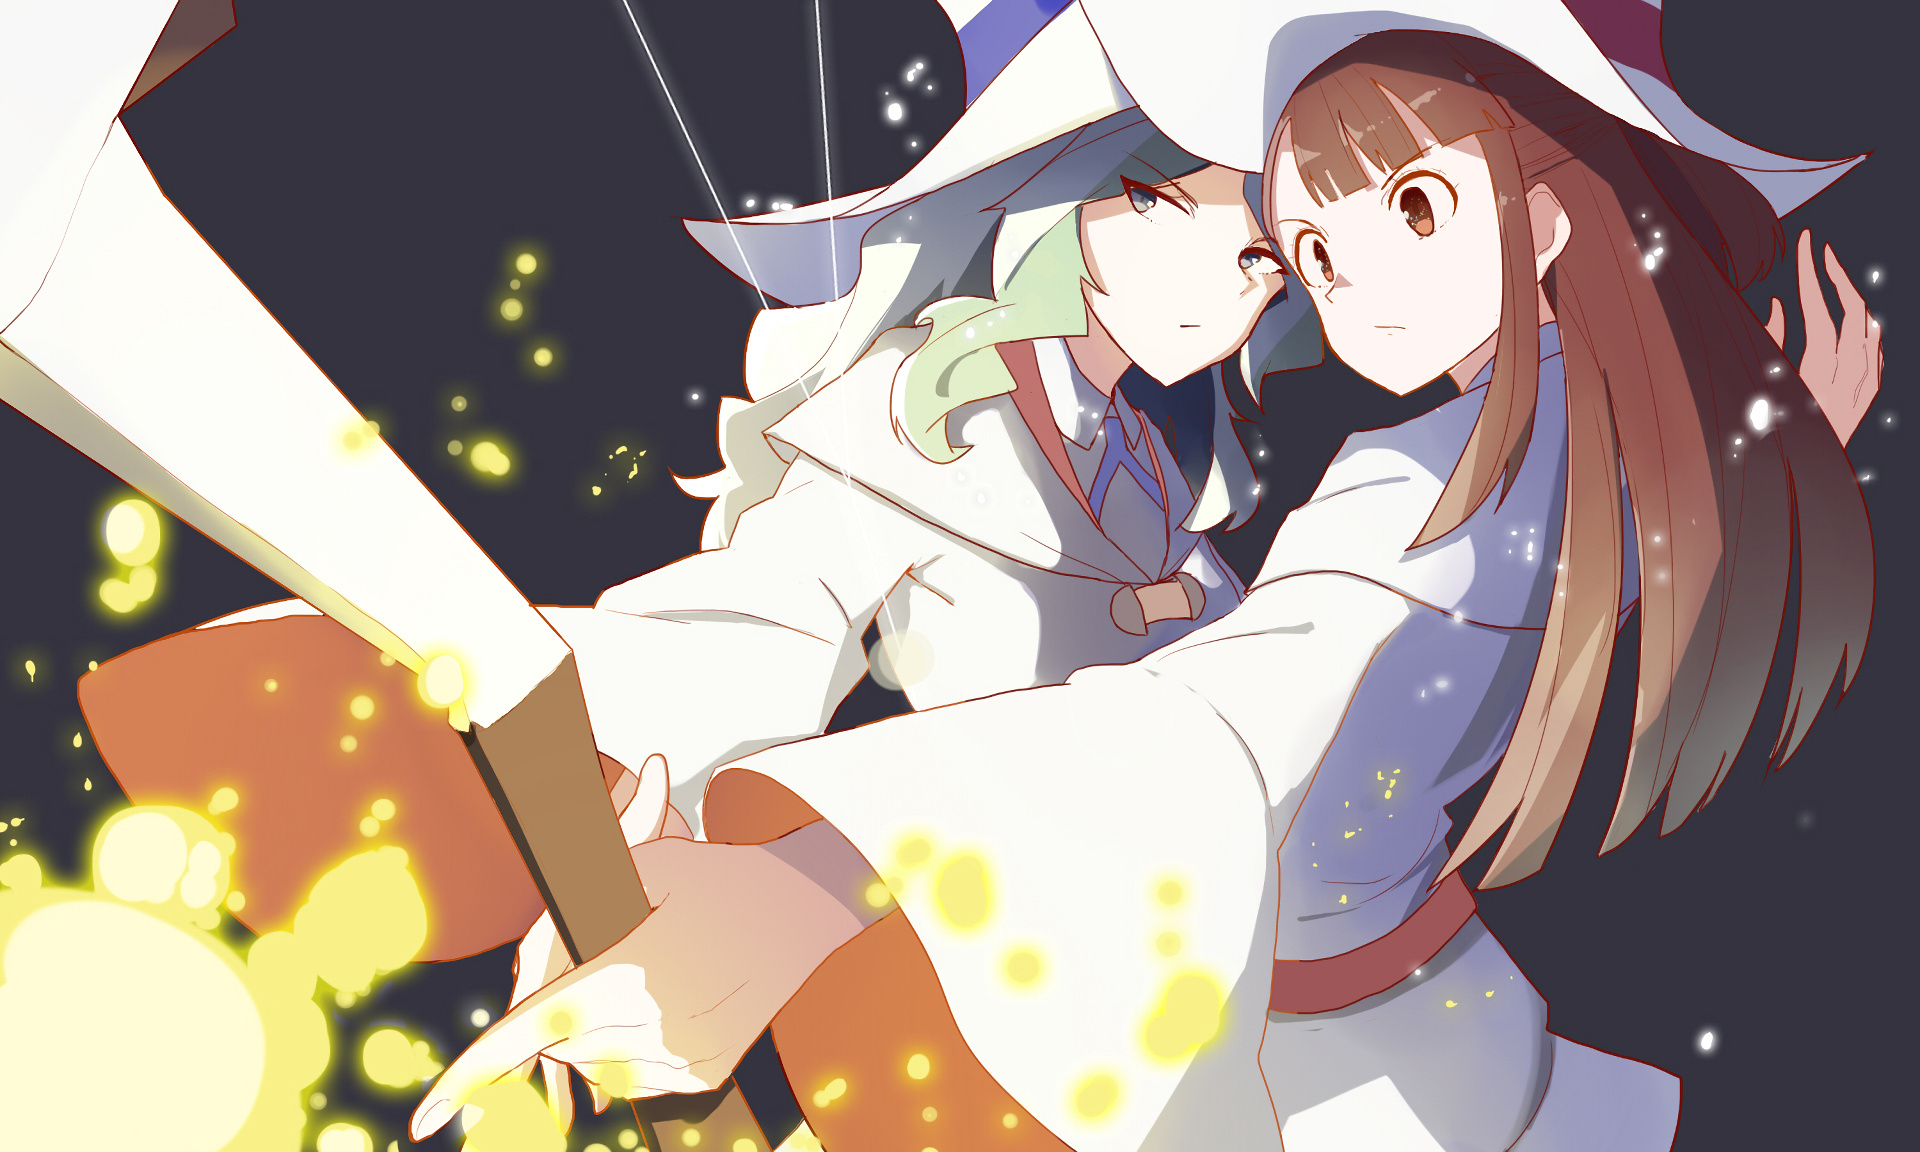 Little Witch Academia anime, Magical academy life, Adventure-filled story, Colorful visuals, 1920x1160 HD Desktop